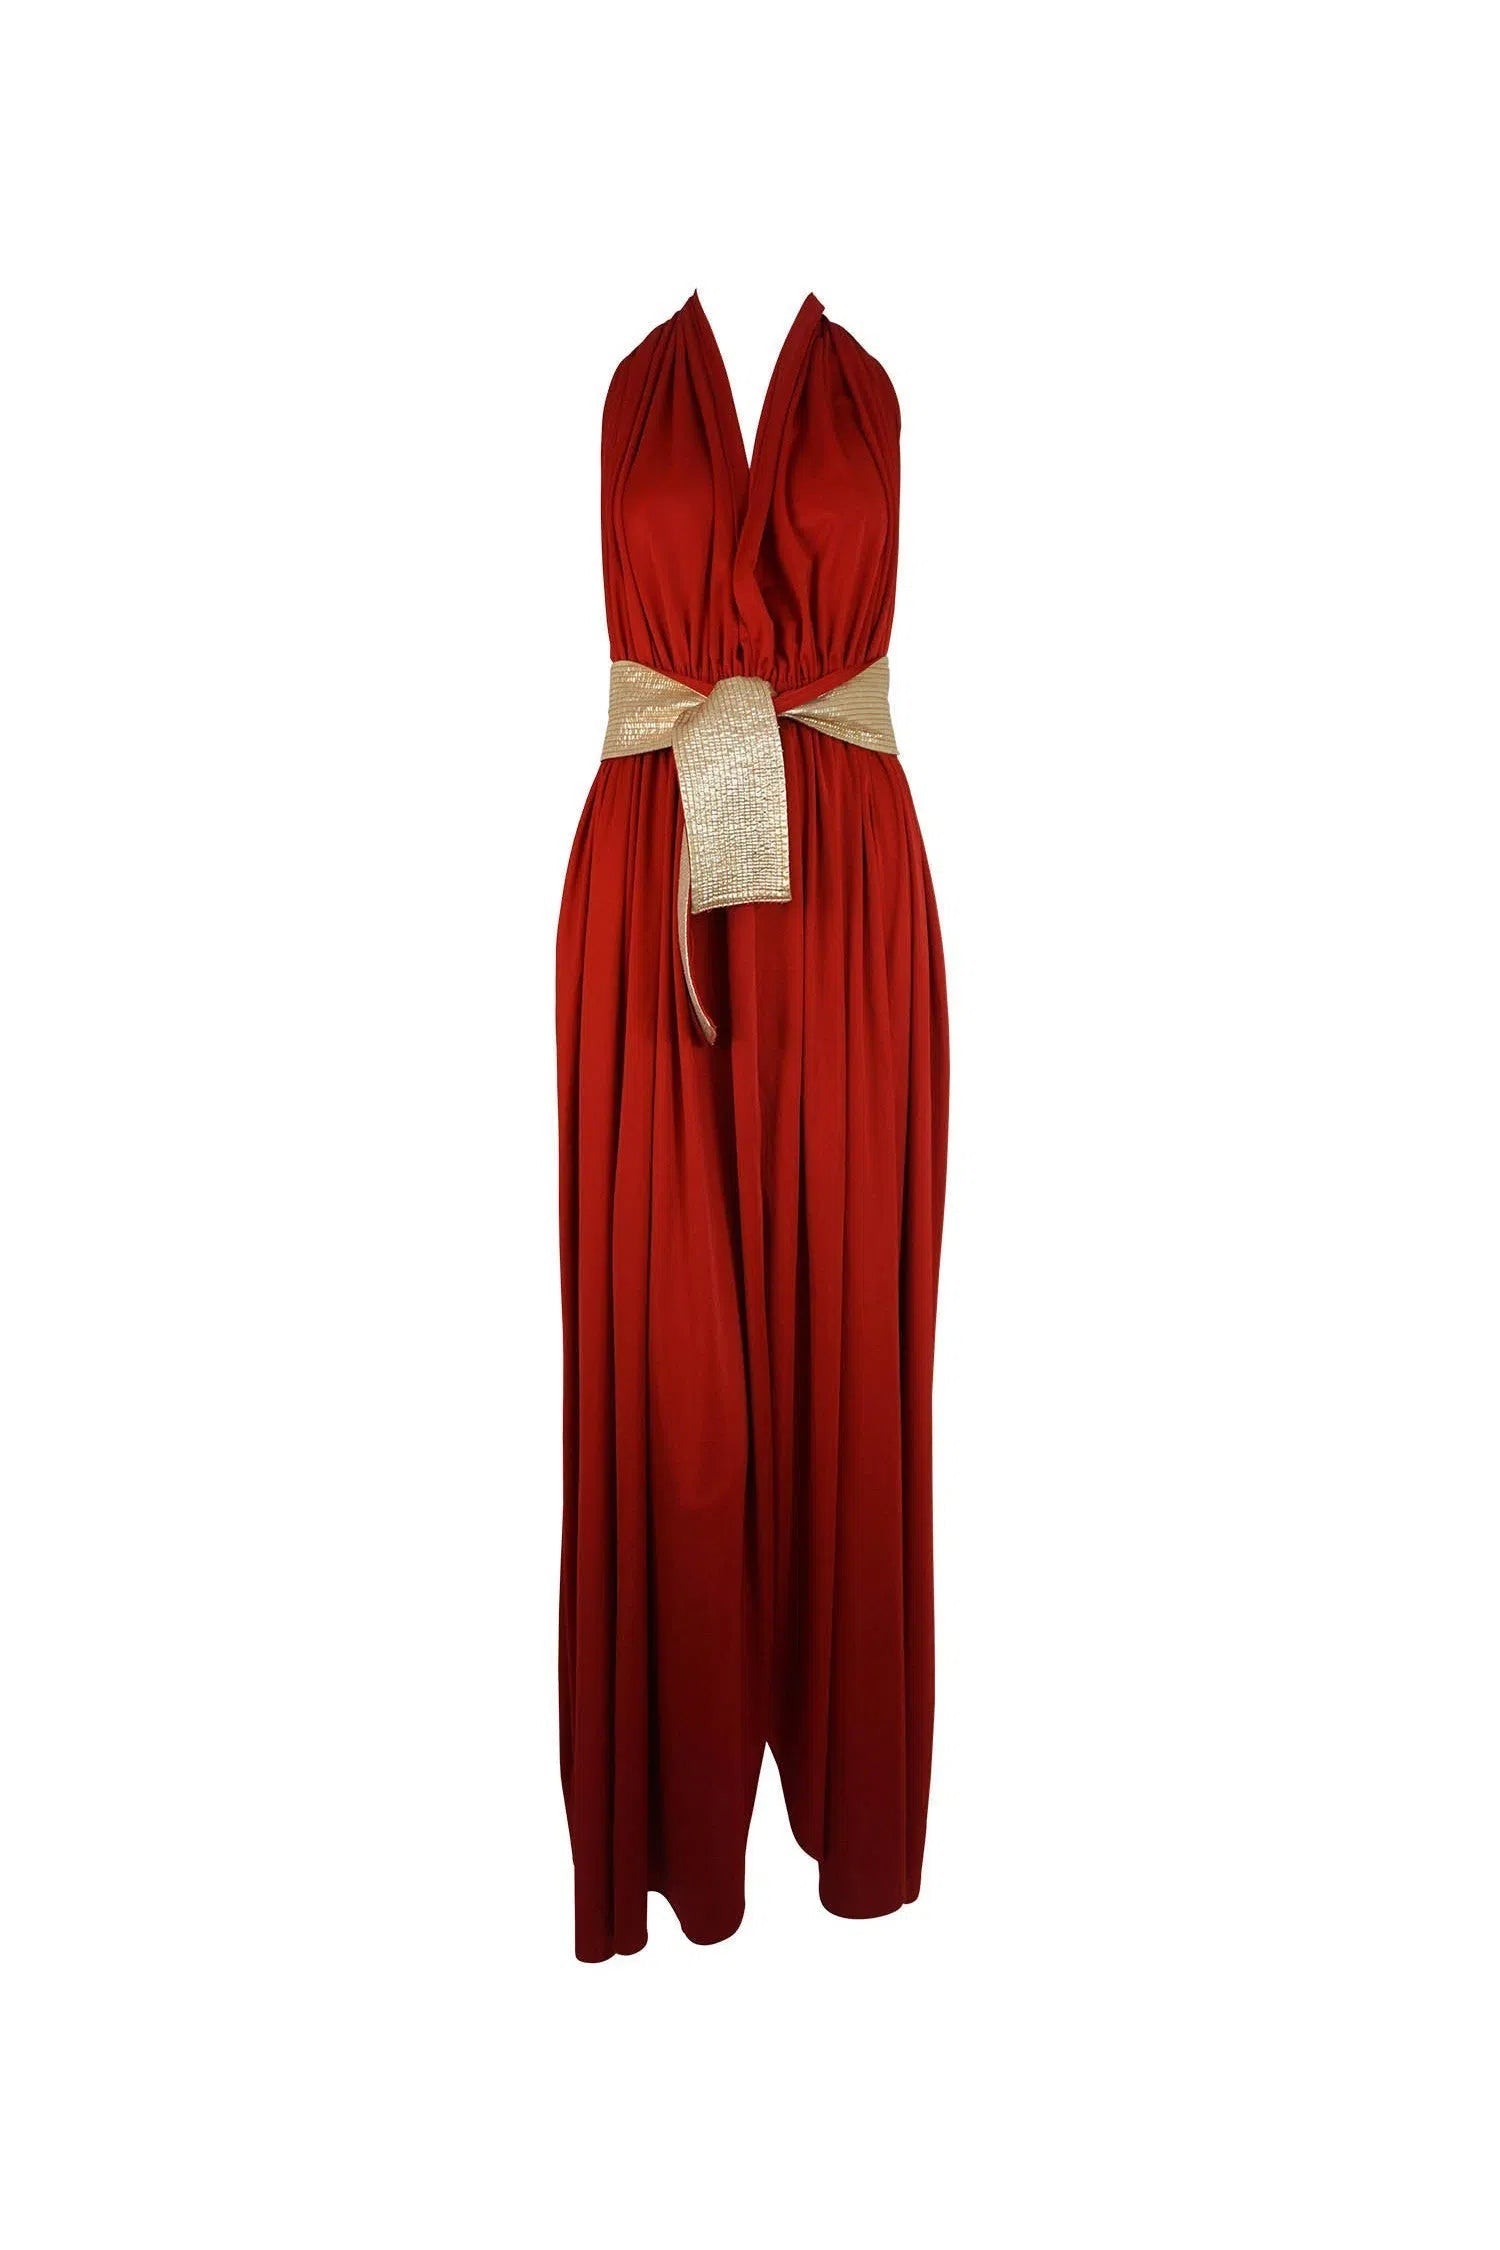 Bill Tice Red Jersey Gown Vintage 1970s